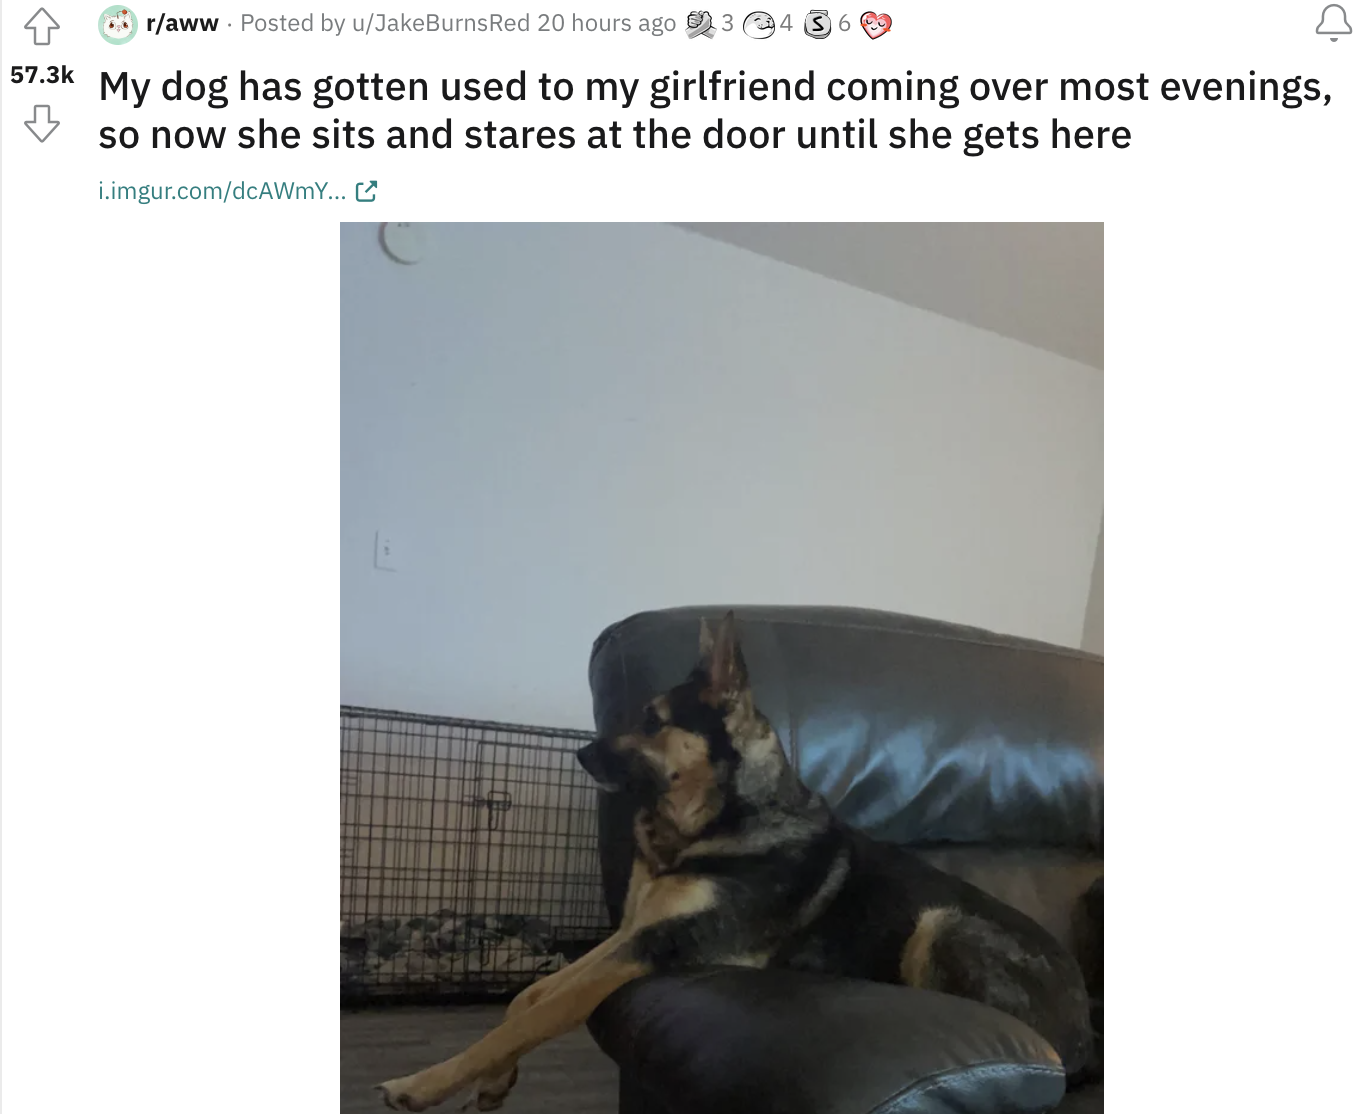 German shepherd sitting on a couch and looking straight ahead, with text: &quot;My dog has gotten used to my girlfriend coming over most evenings, so now she sits and stares at the door until she gets here&quot;